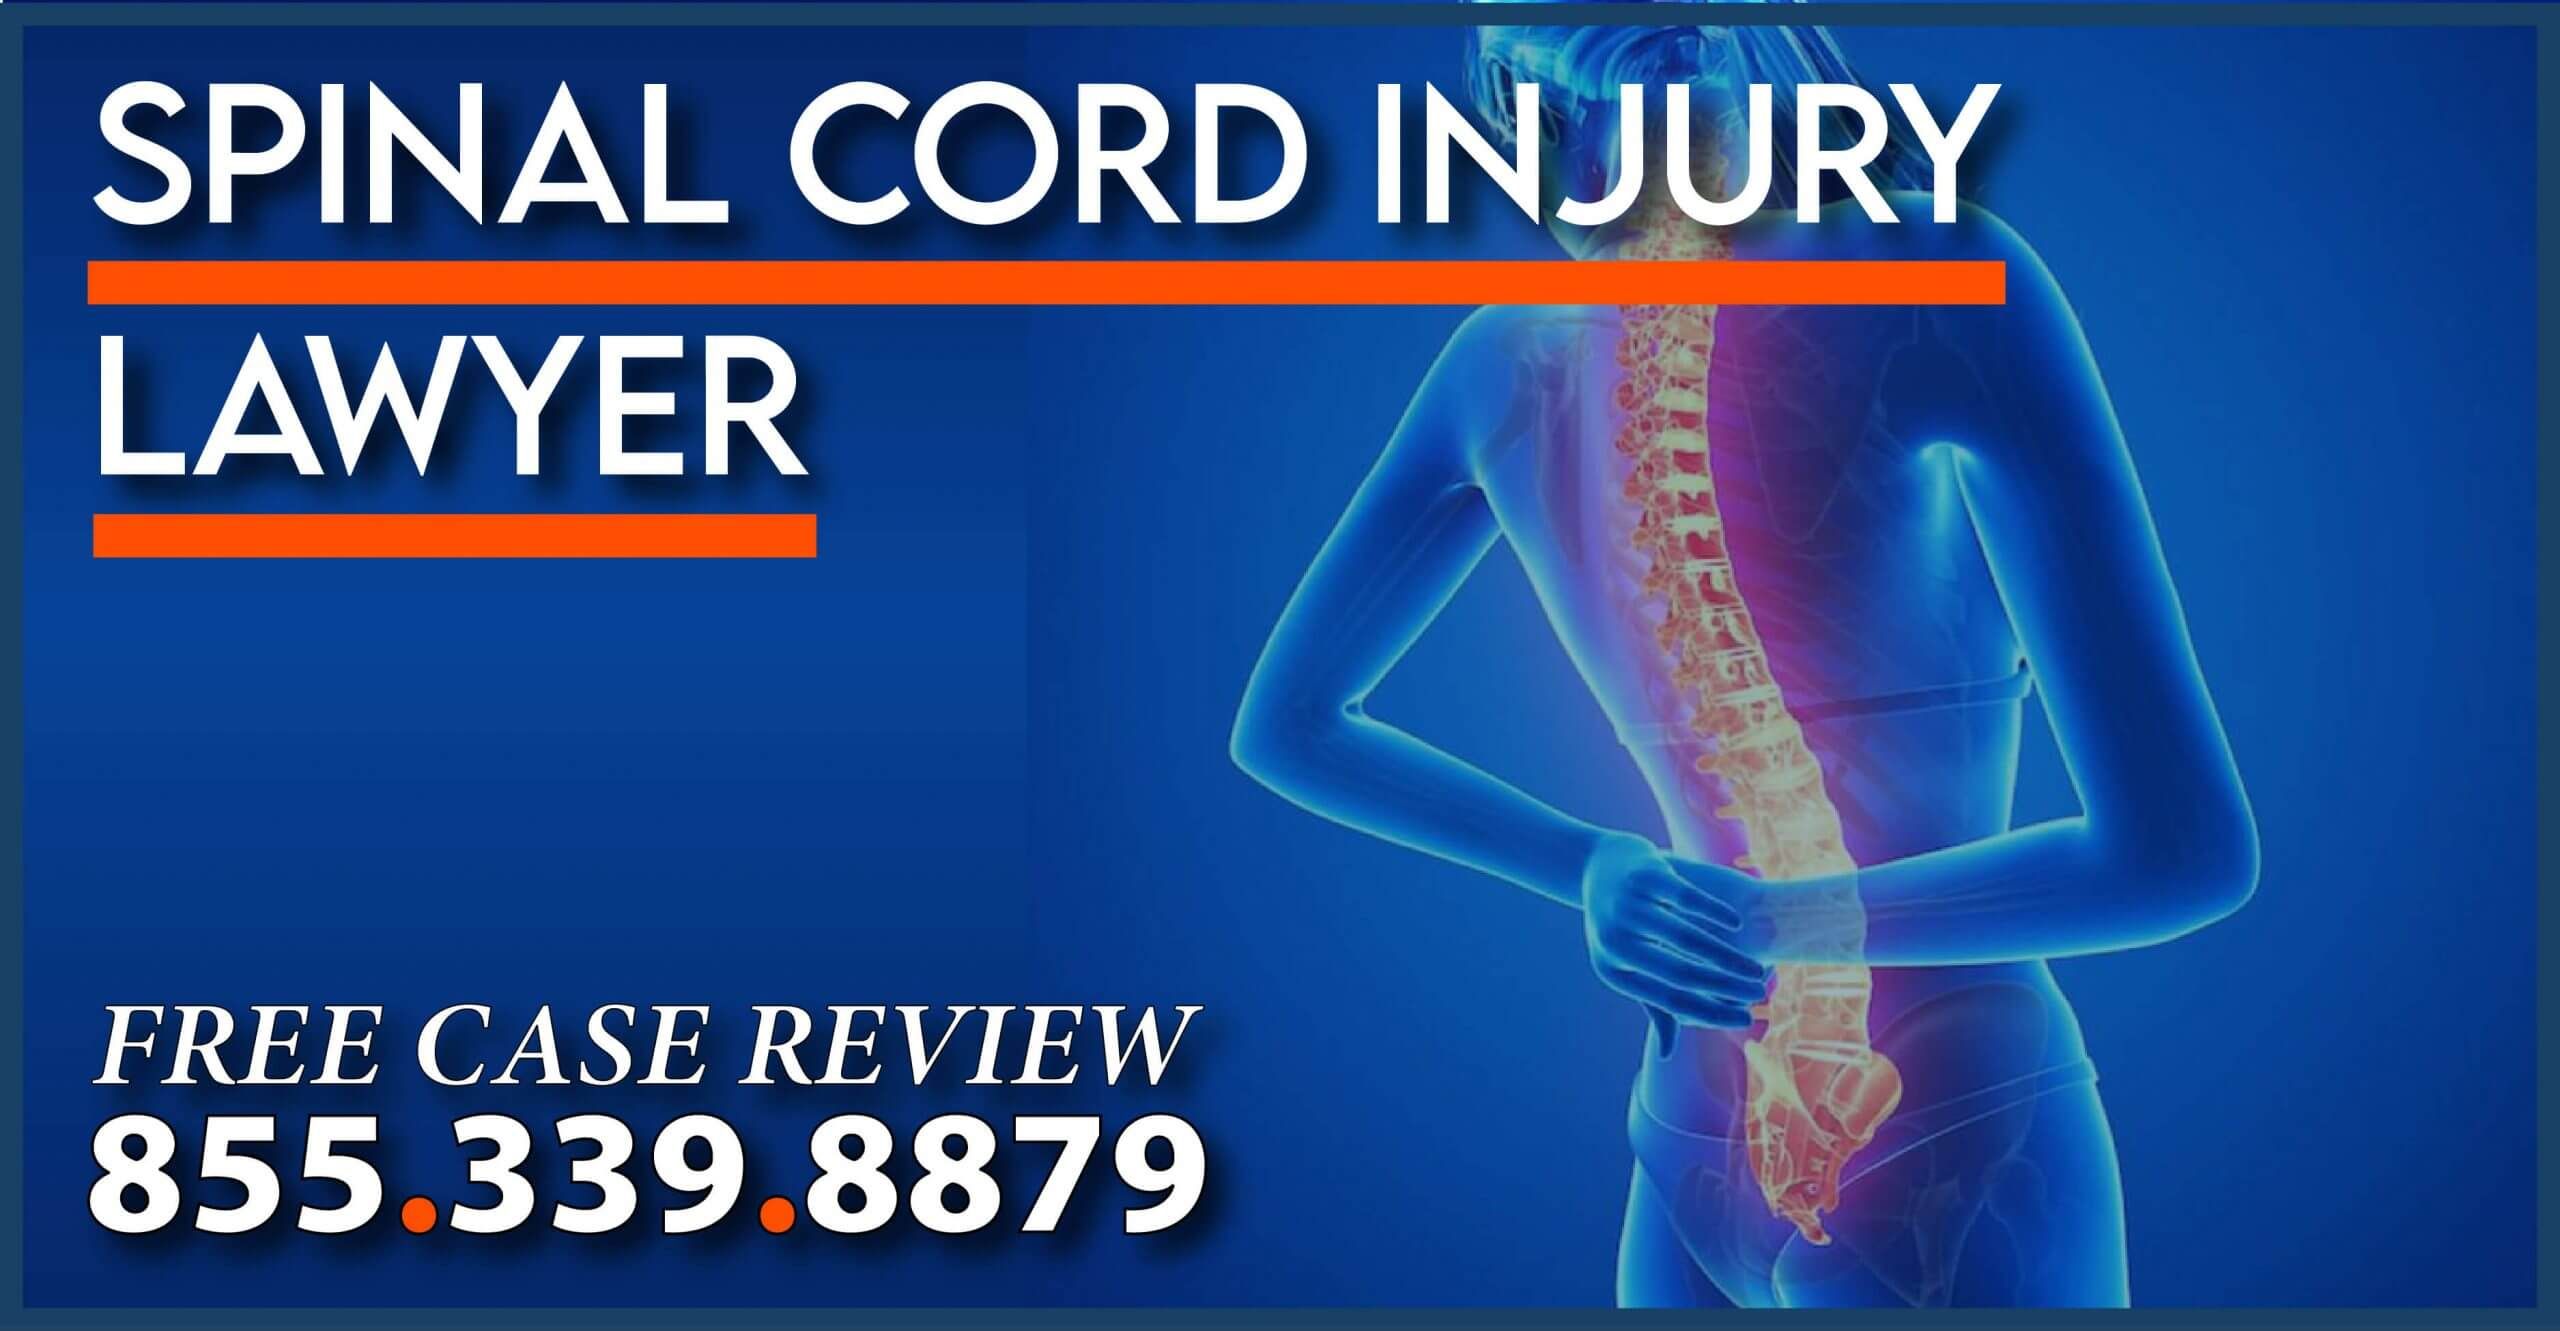 spinal cord injury lawyer negligence incident accident attorney sue compensation